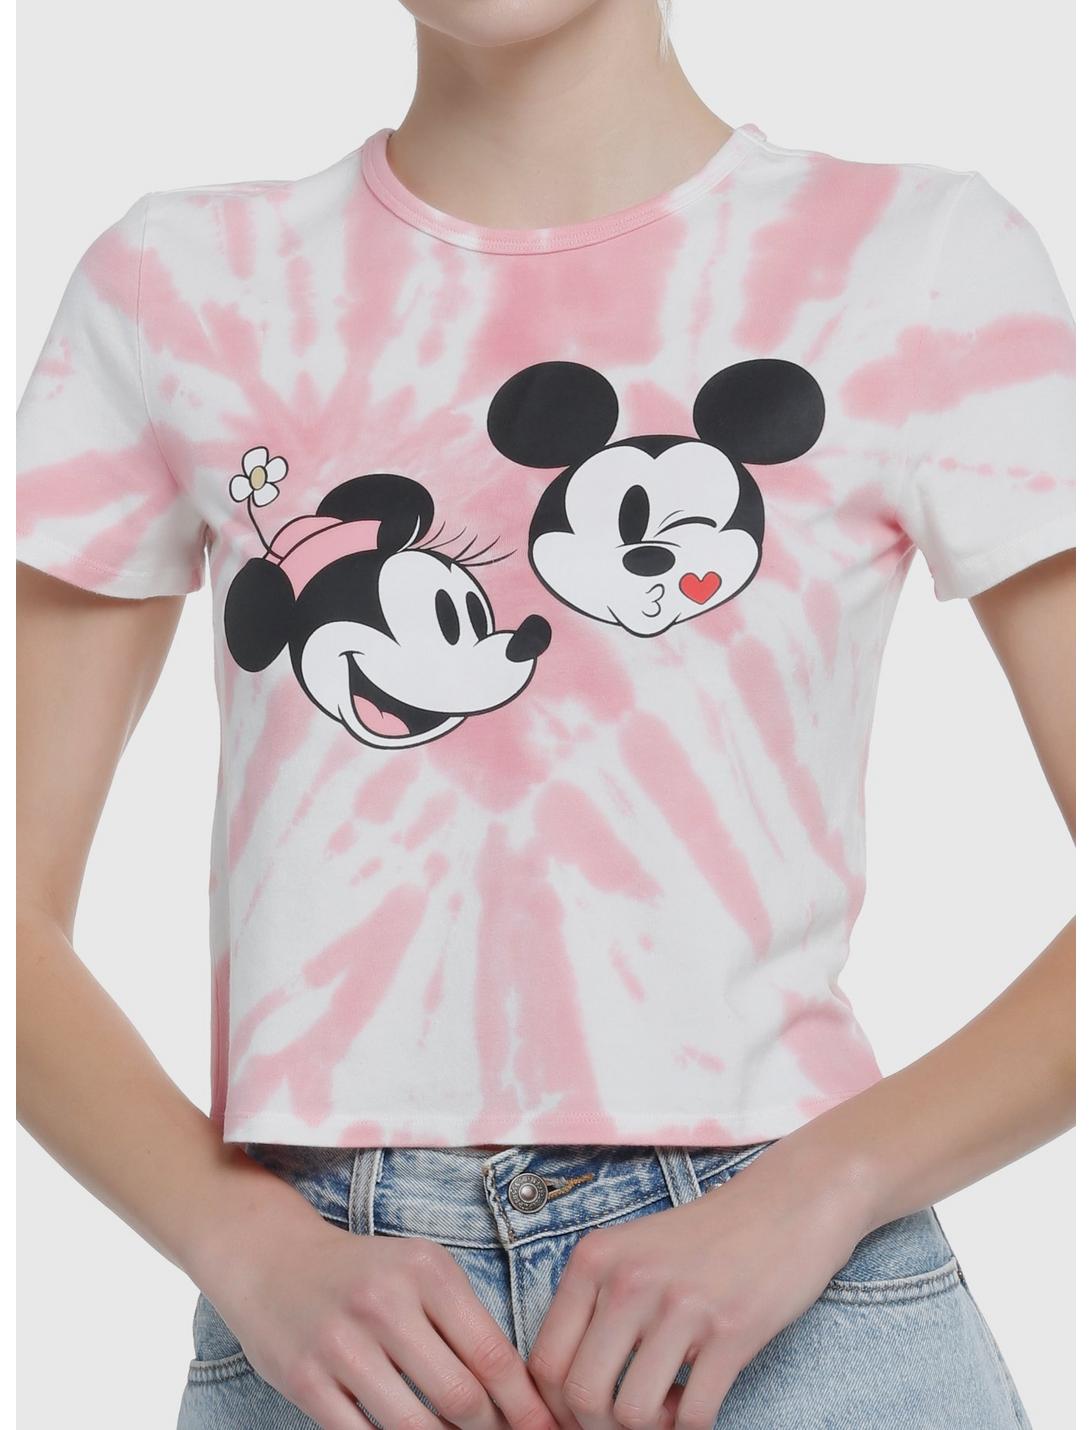 Her Universe Disney Mickey Mouse & Minnie Mouse Kiss Tie-Dye Crop Girls T-Shirt, MULTI, hi-res